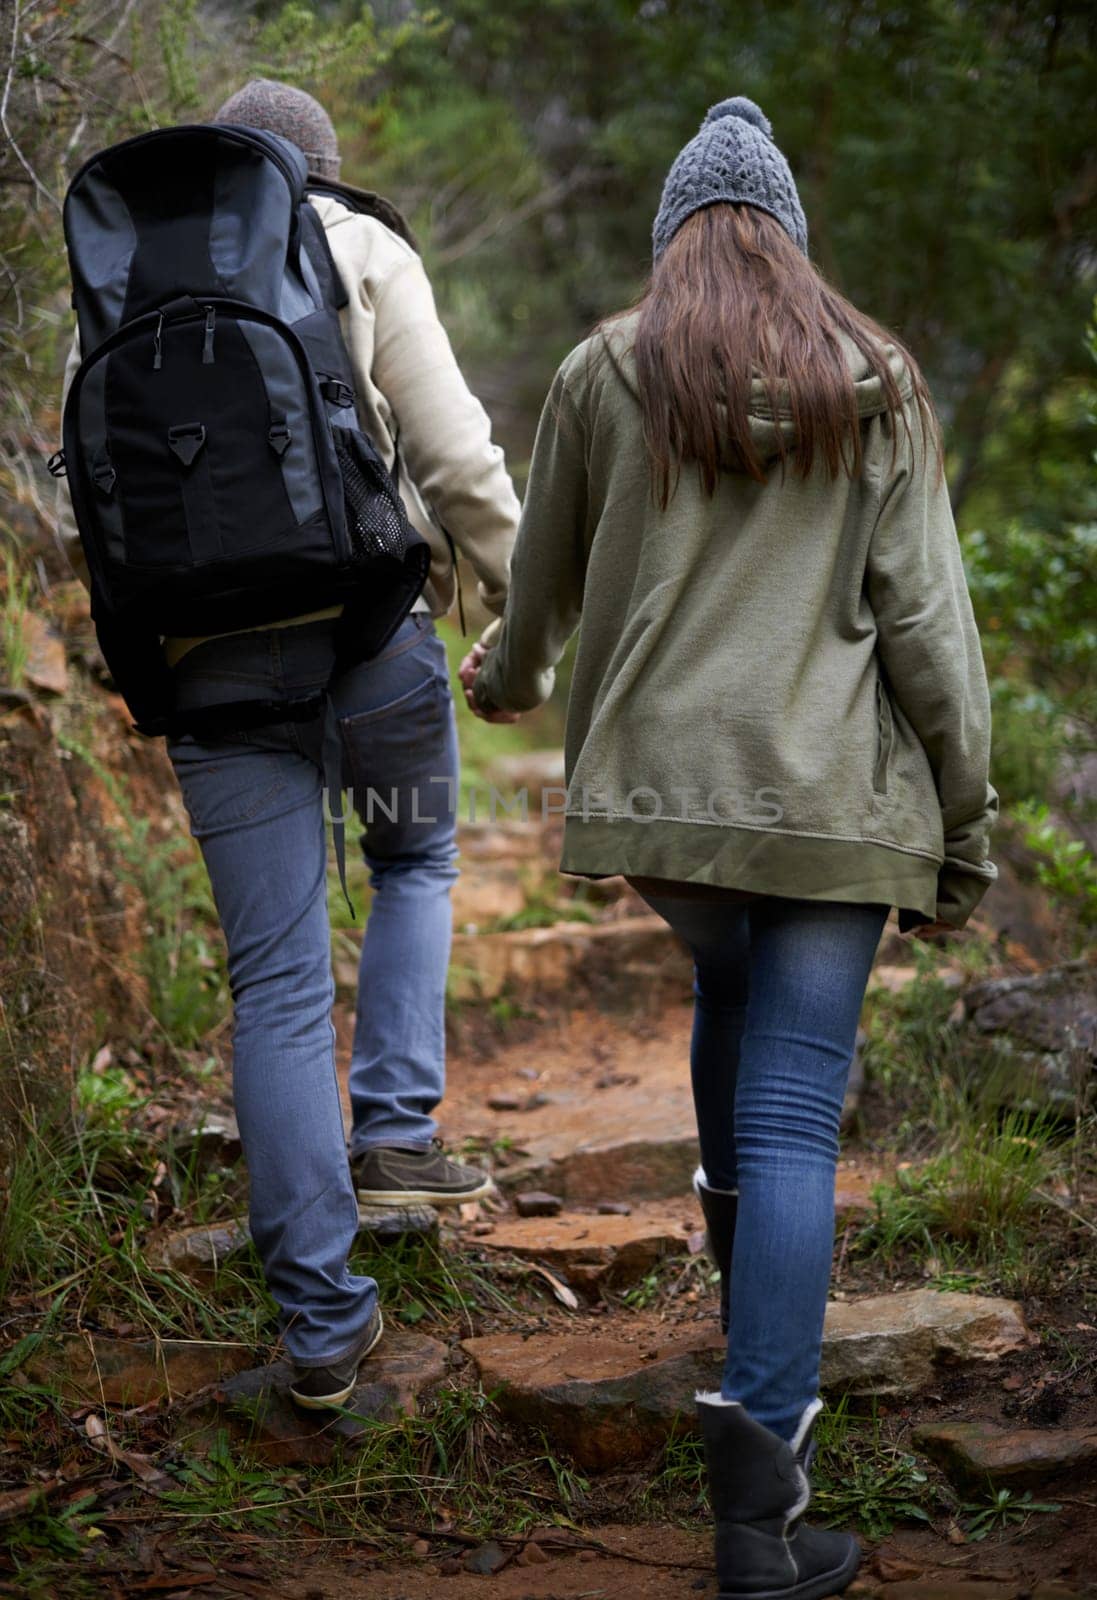 Couple, hiking in nature and holding hands for outdoor adventure and travel journey in a forest or eco woods. Back of People with love, support and walking or trekking in backpack on mountains path.